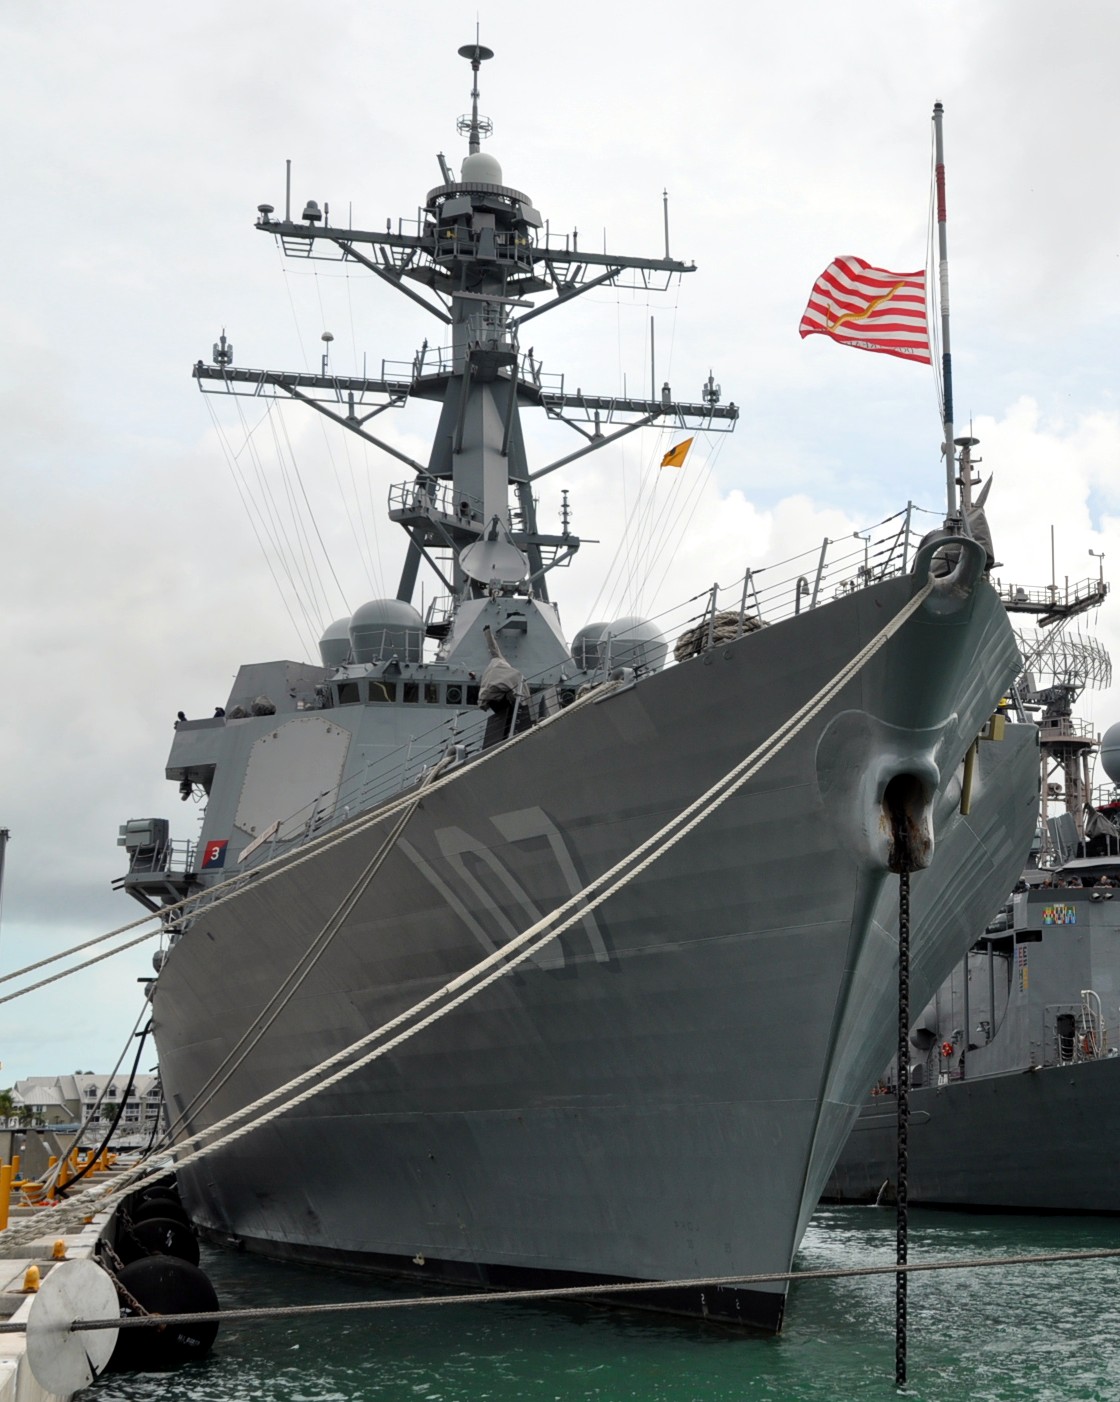 ddg-107 uss gravely arleigh burke class guided missile destroyer aegis us navy key west florida 31p